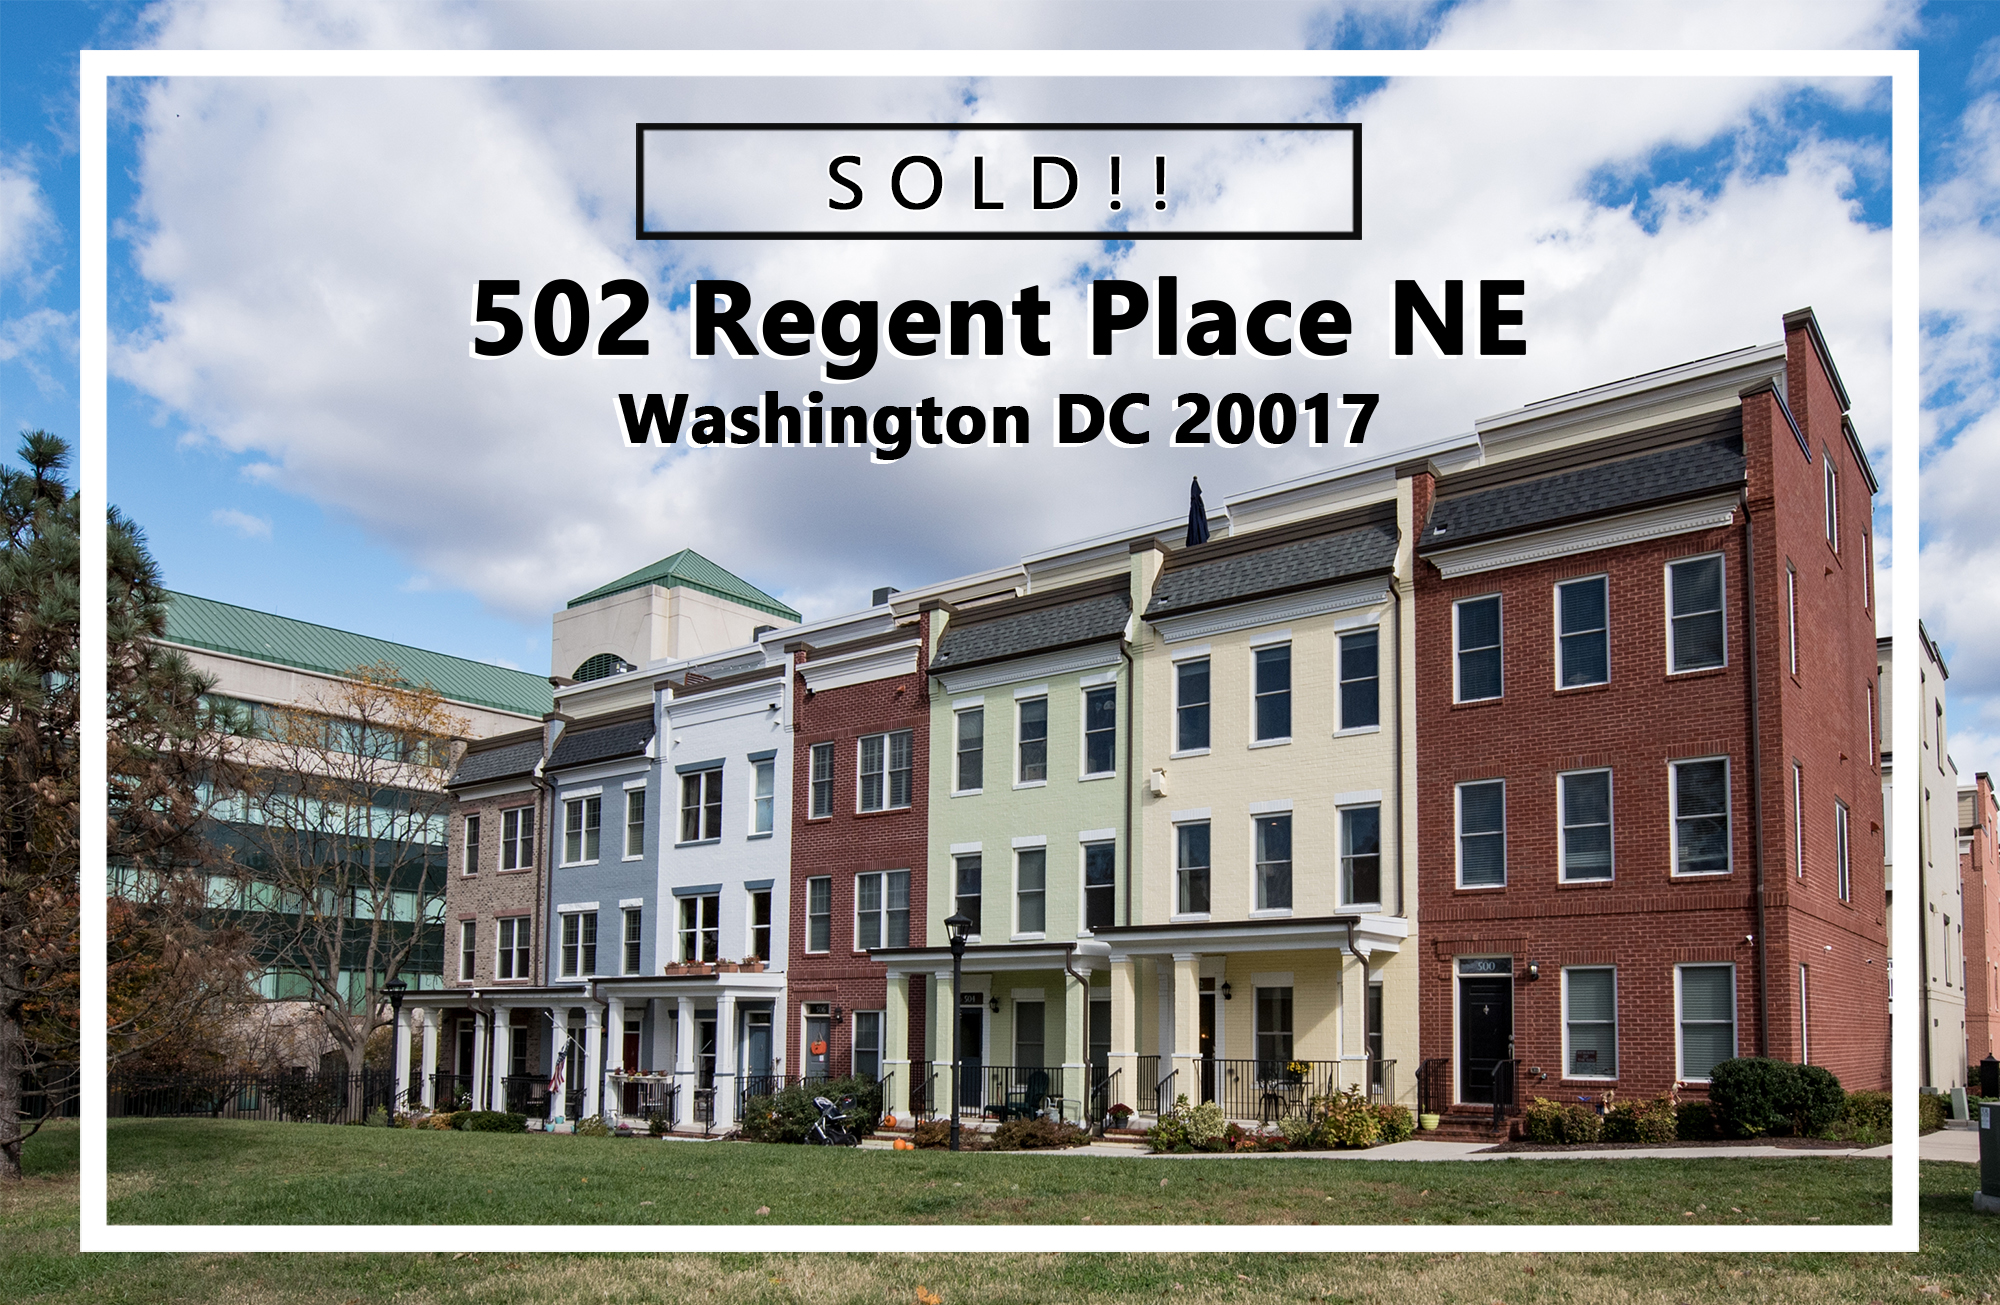 Our Listing in DC!